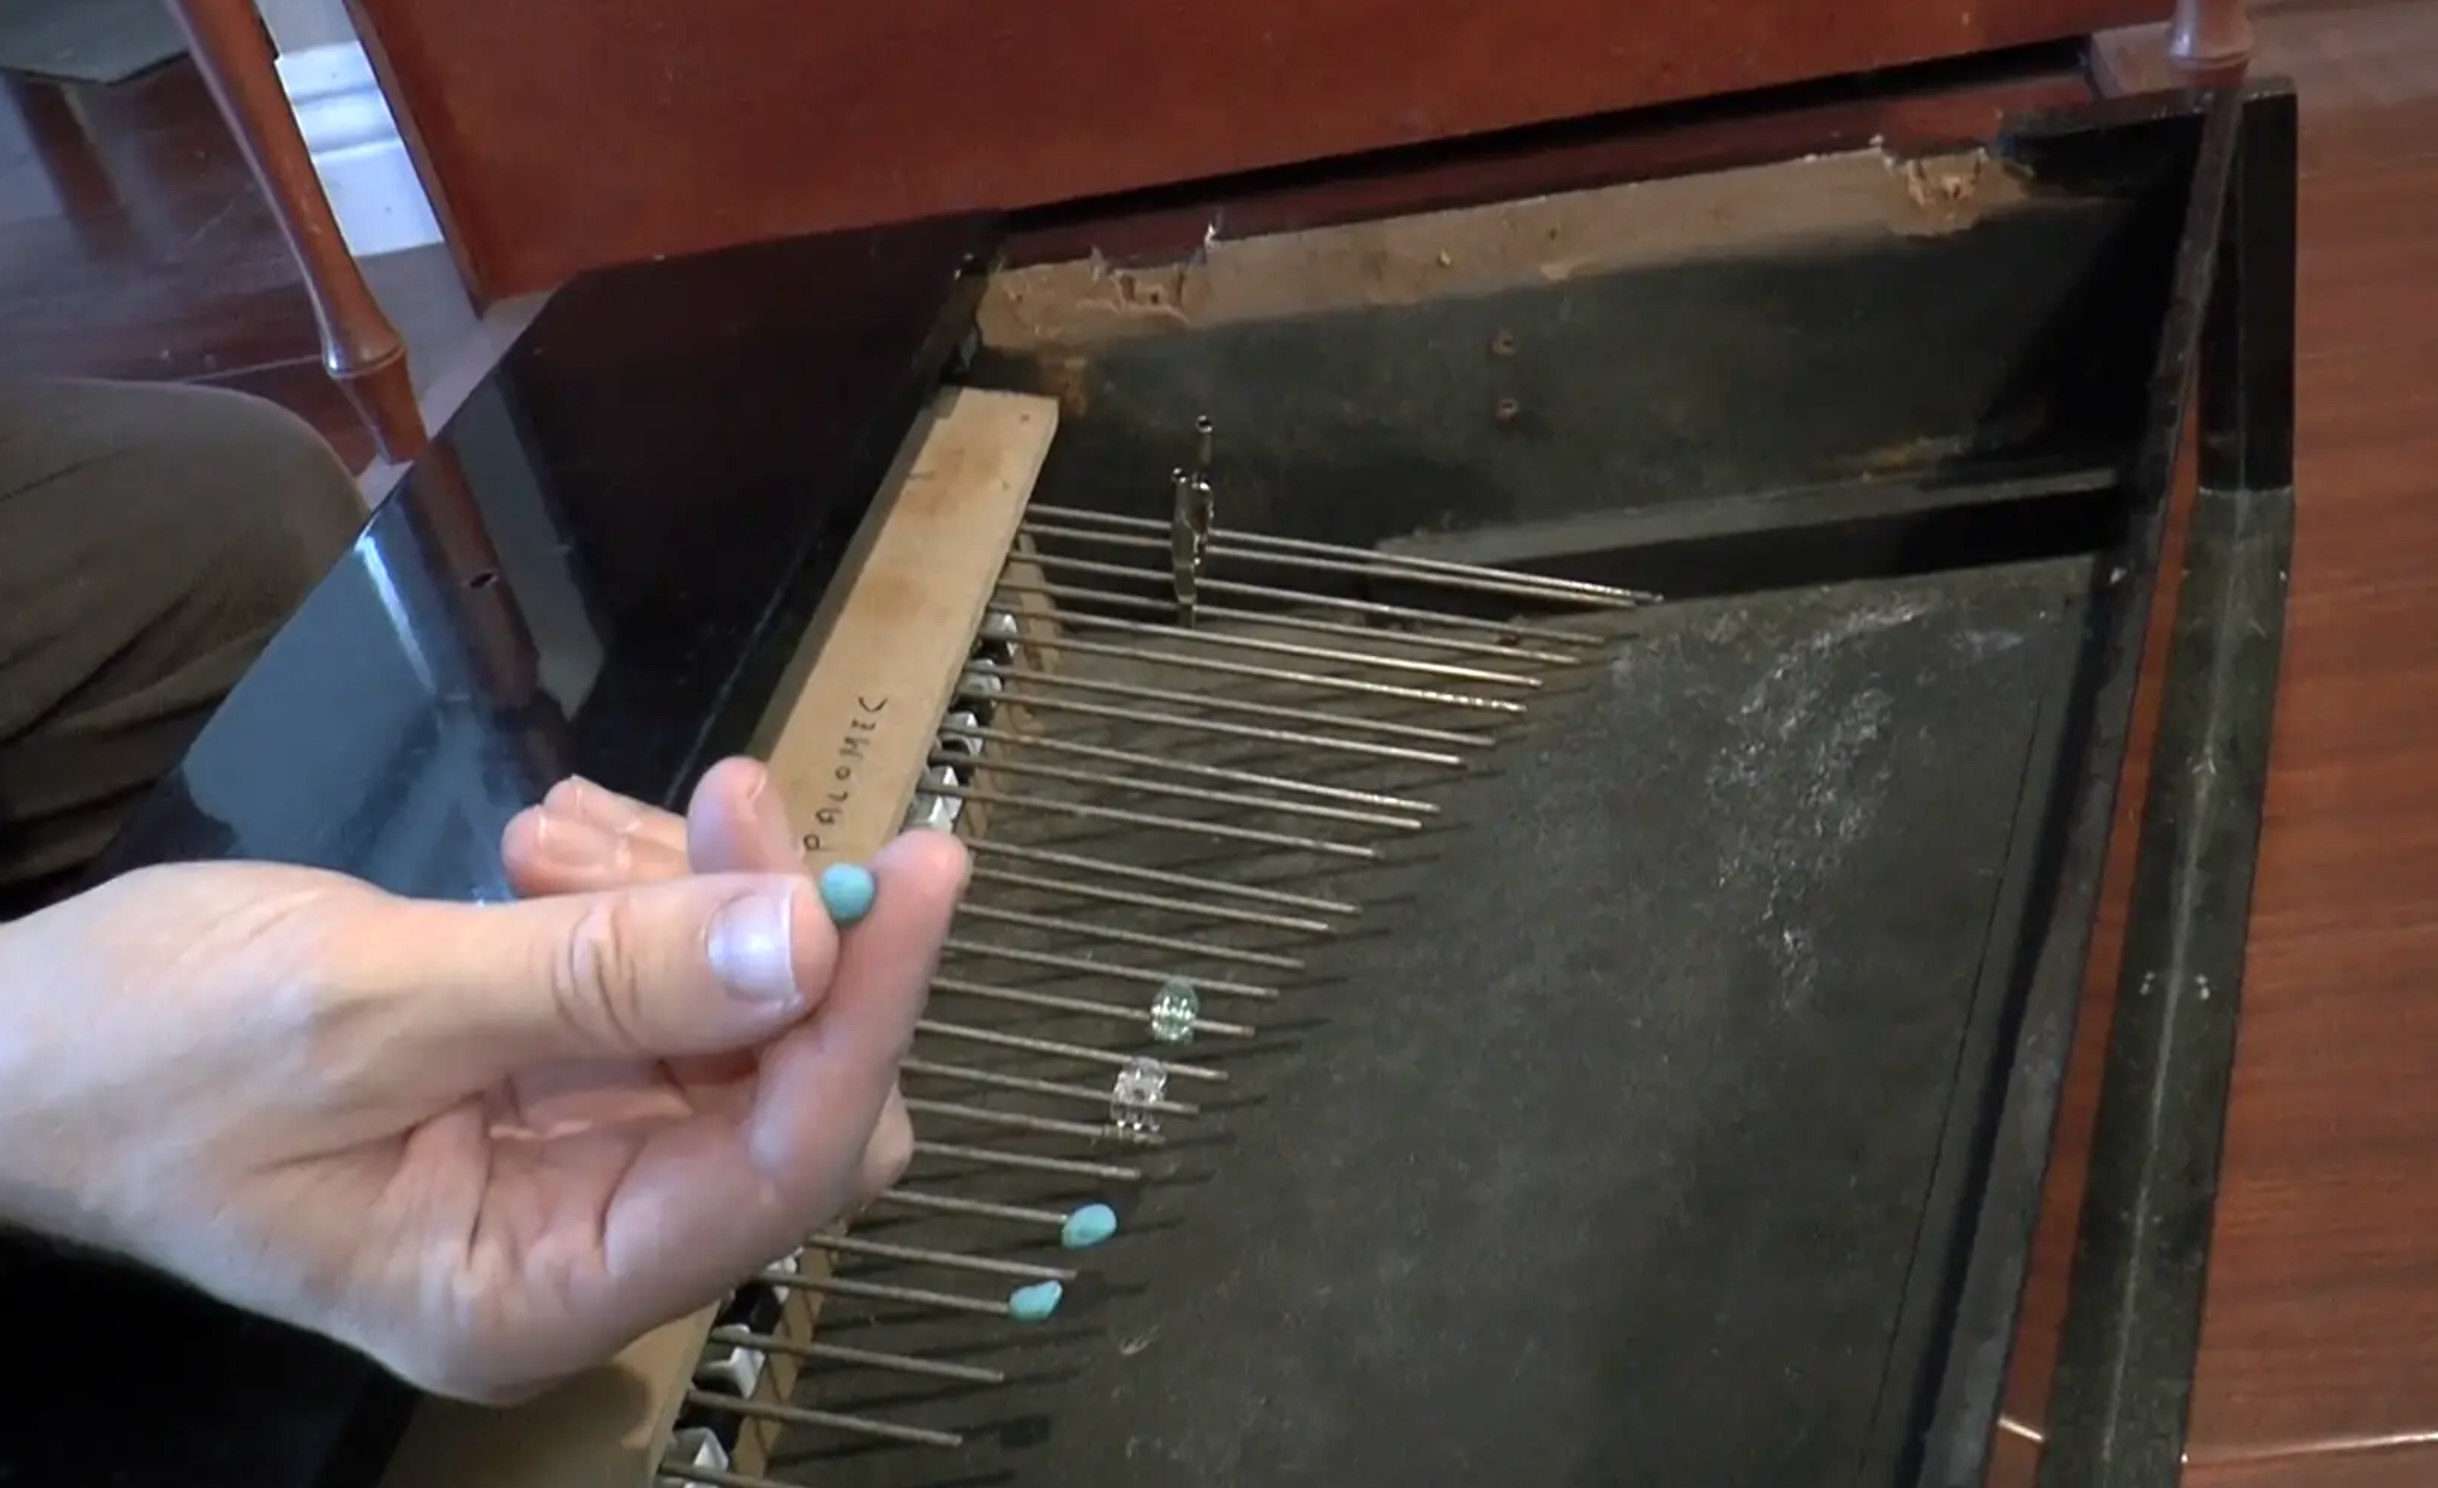 Hand inside toy piano